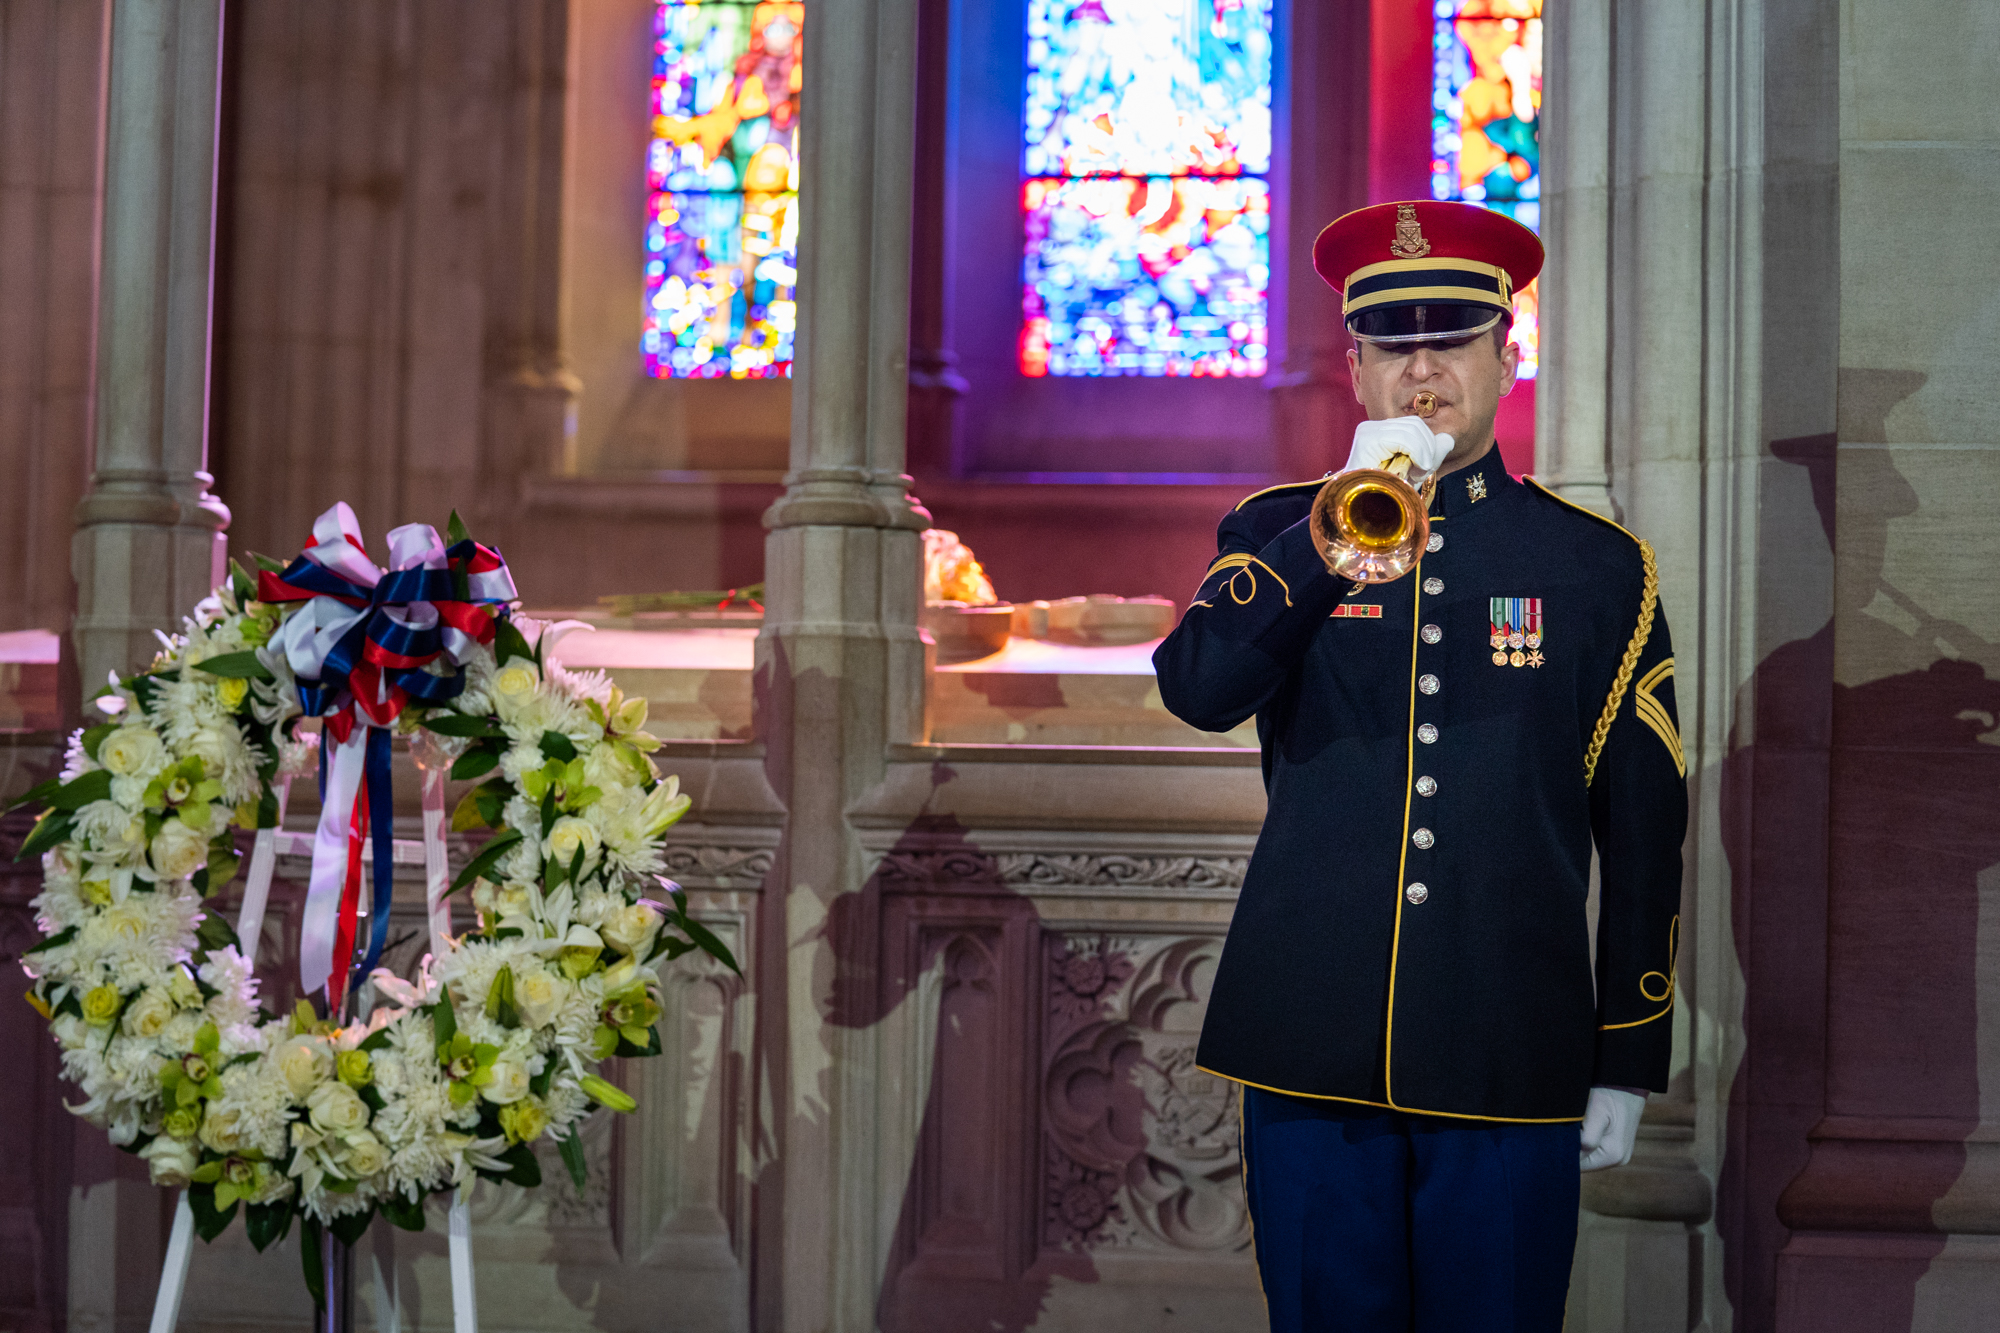  A member of the U.S. Army Band plays Taps while standing alongside the centennial wreath. 